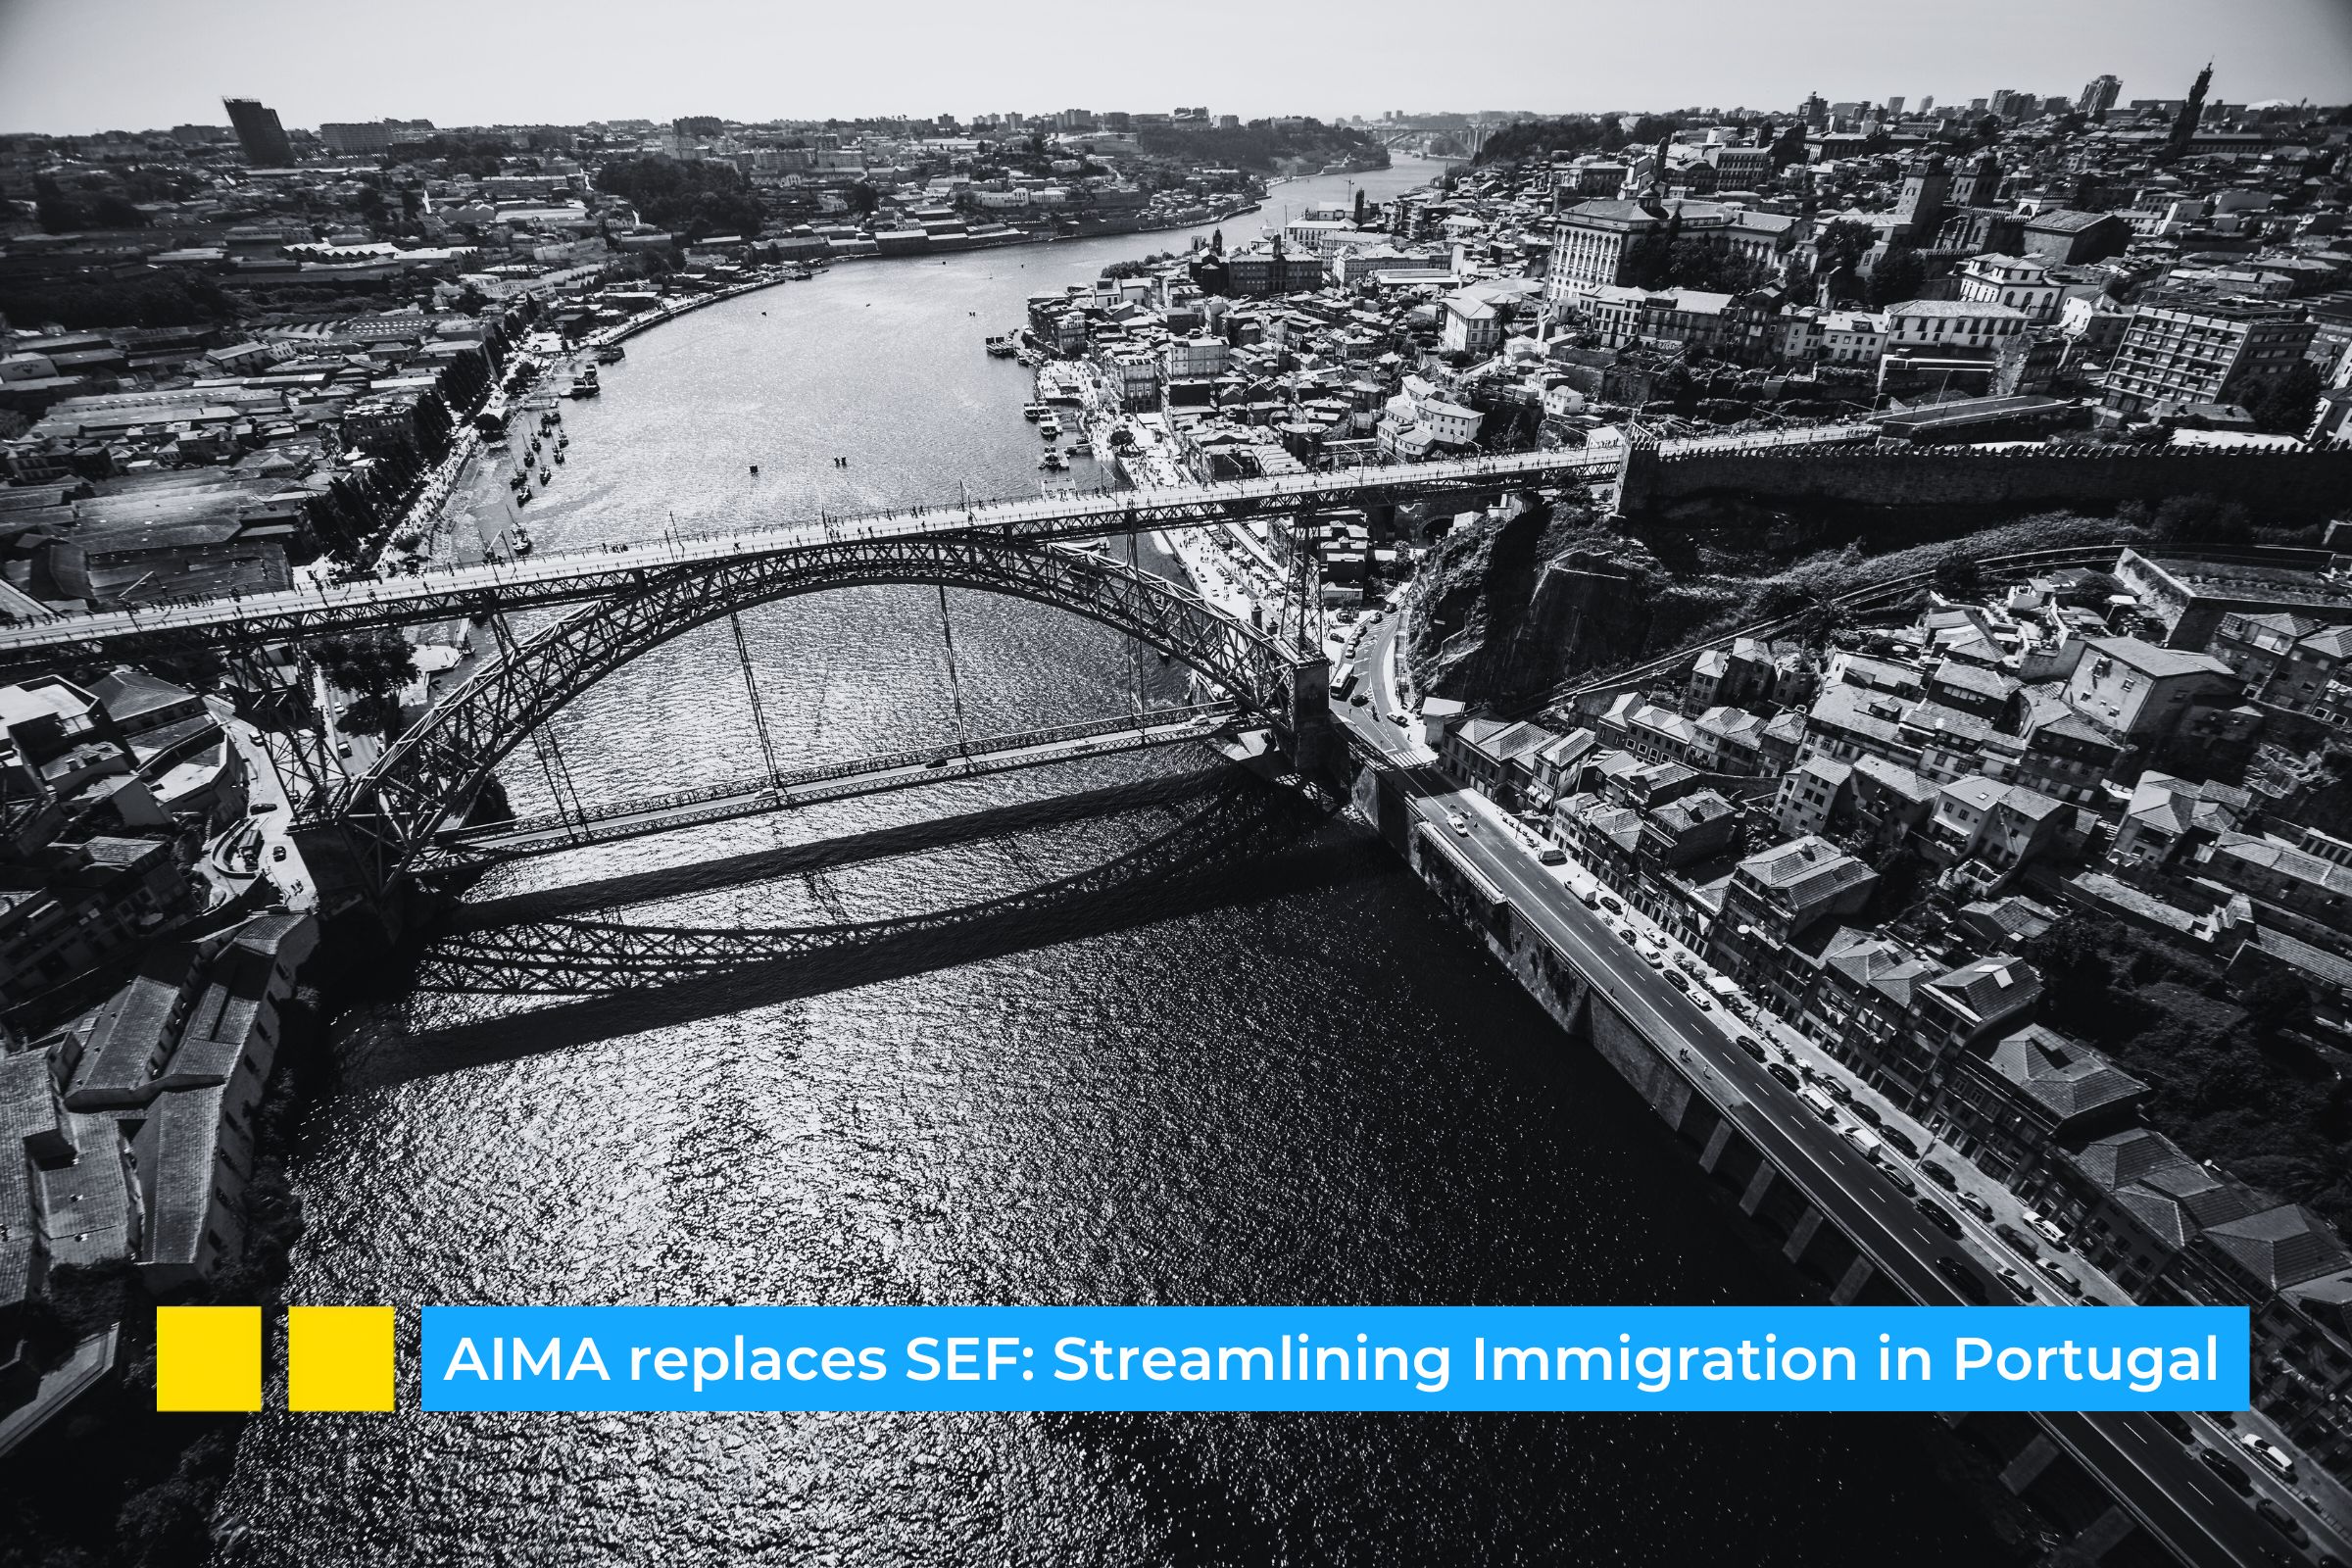 Introducing AIMA: A Positive Step towards Modernising Portugal’s Immigration System